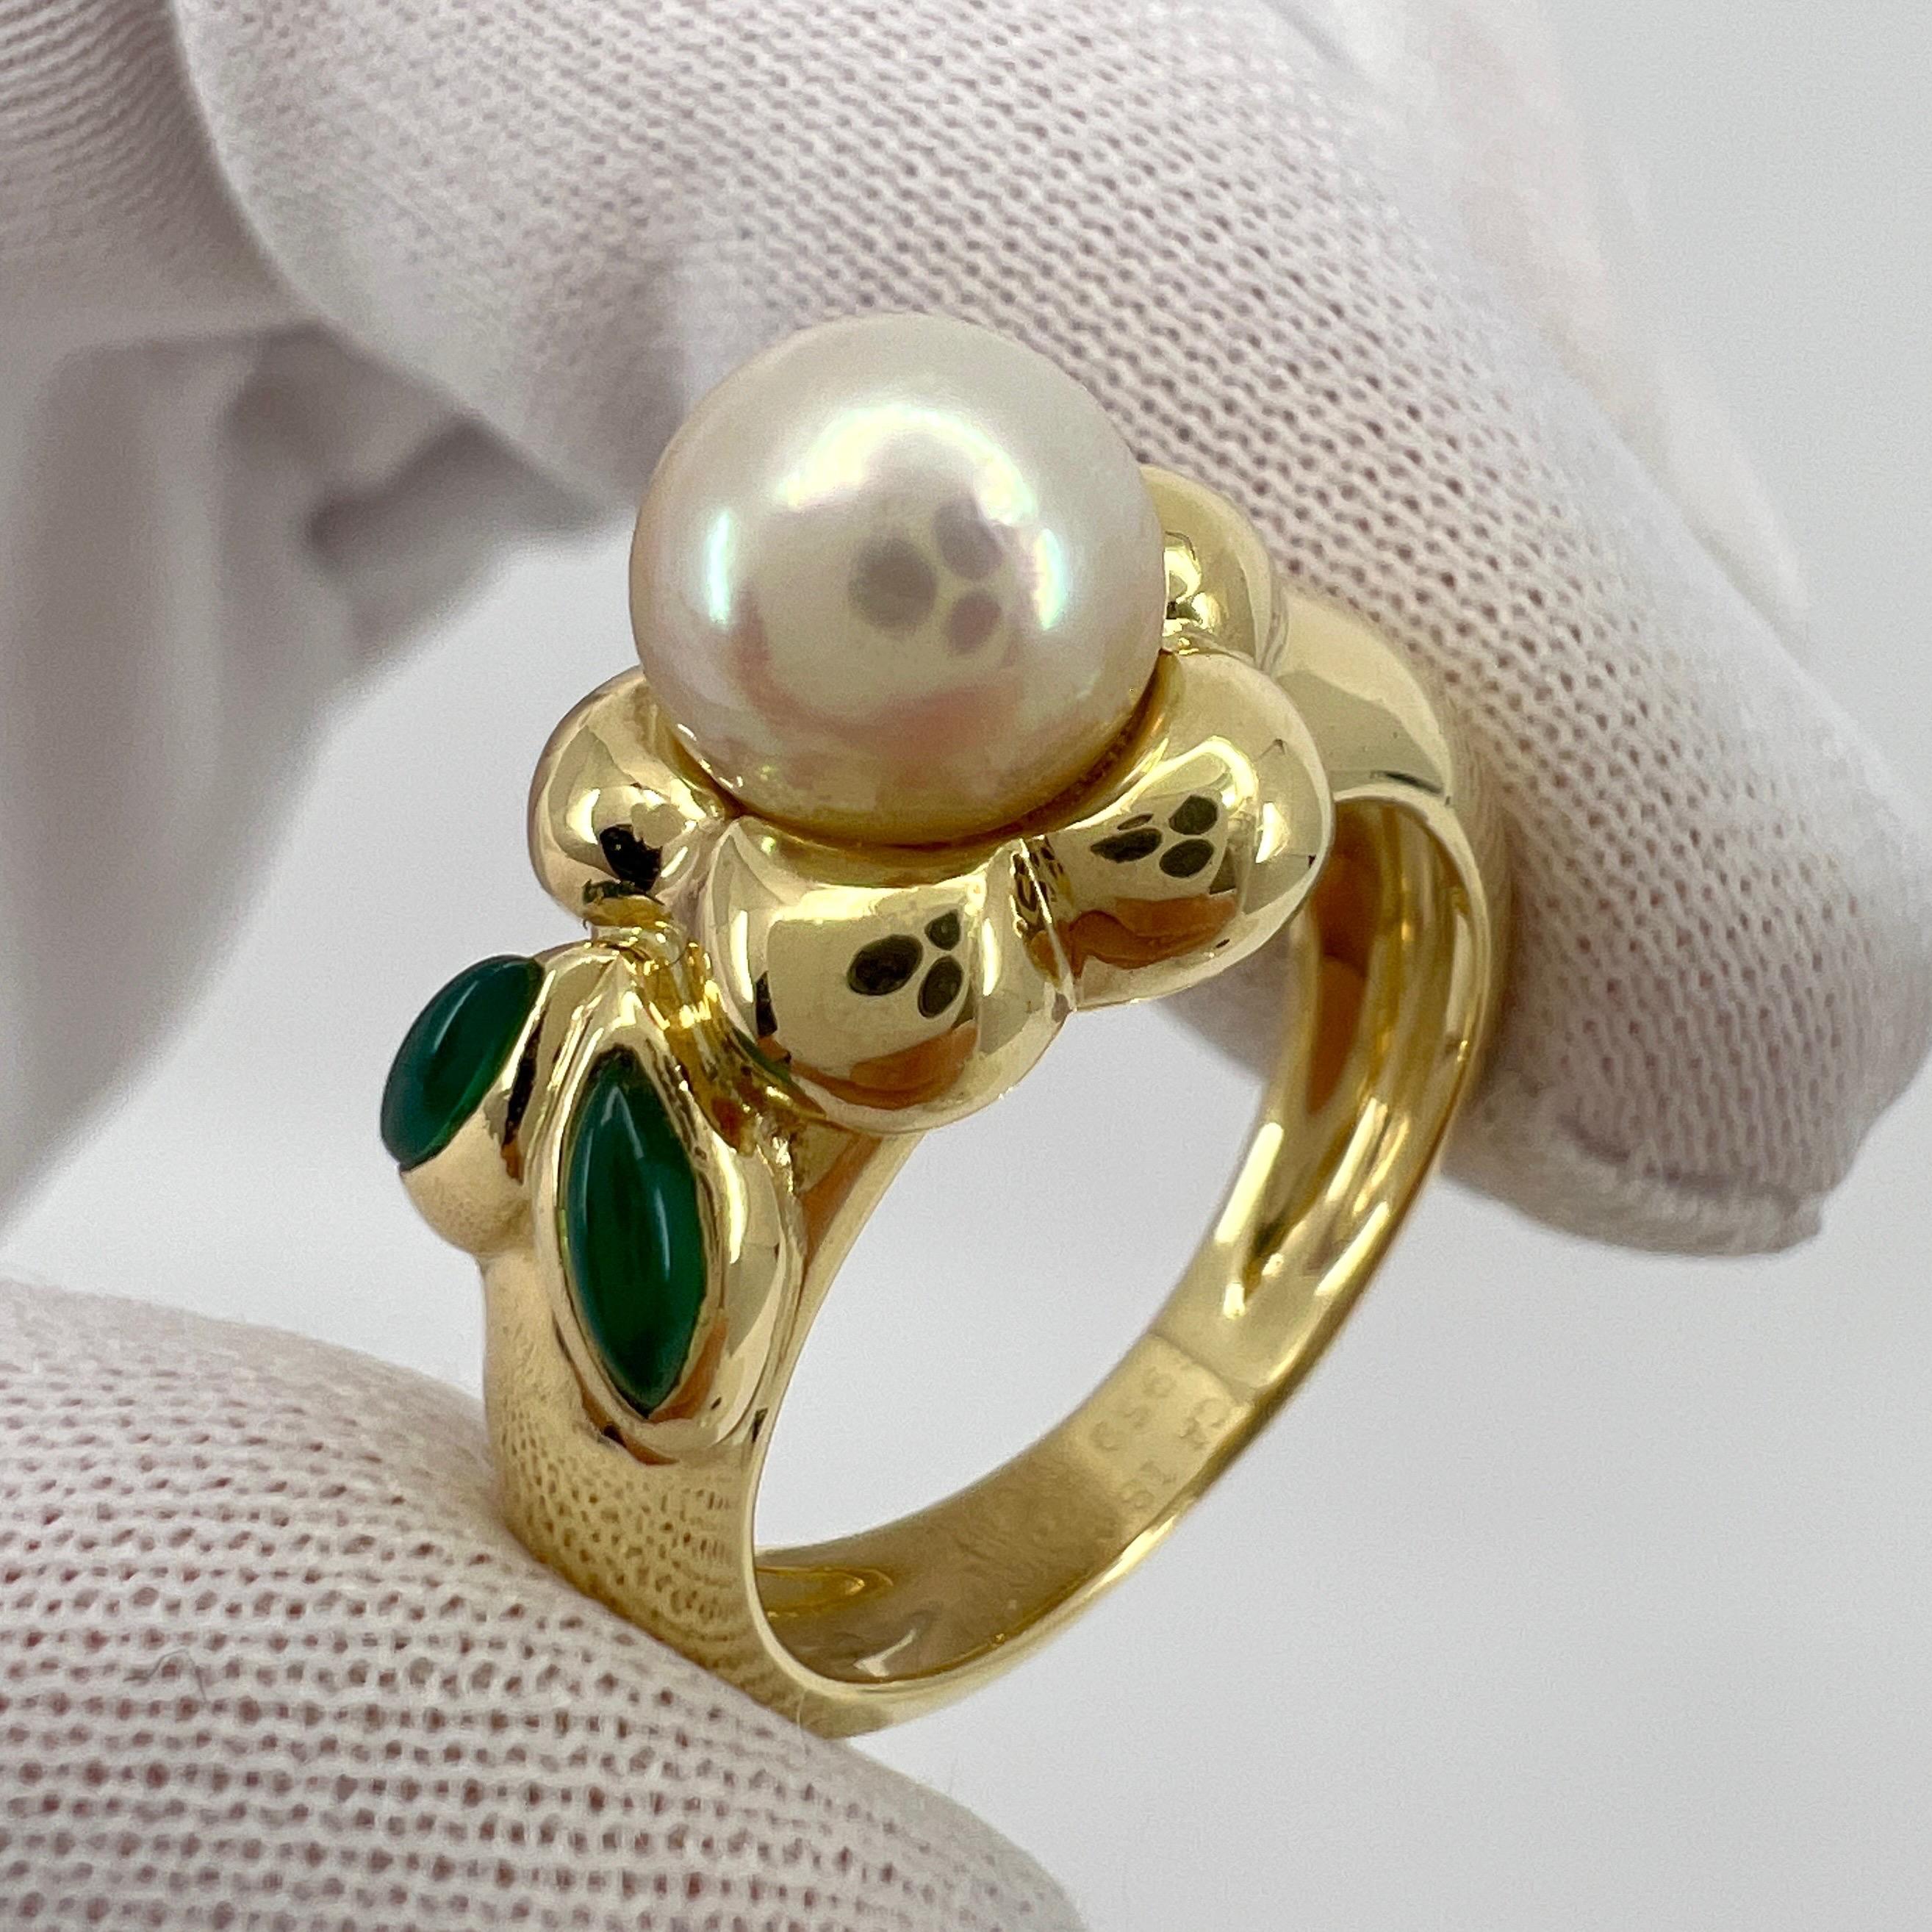 Vintage Van Cleef & Arpels Pearl Chalcedony 18k Yellow Gold Flower Ring with Box For Sale 2